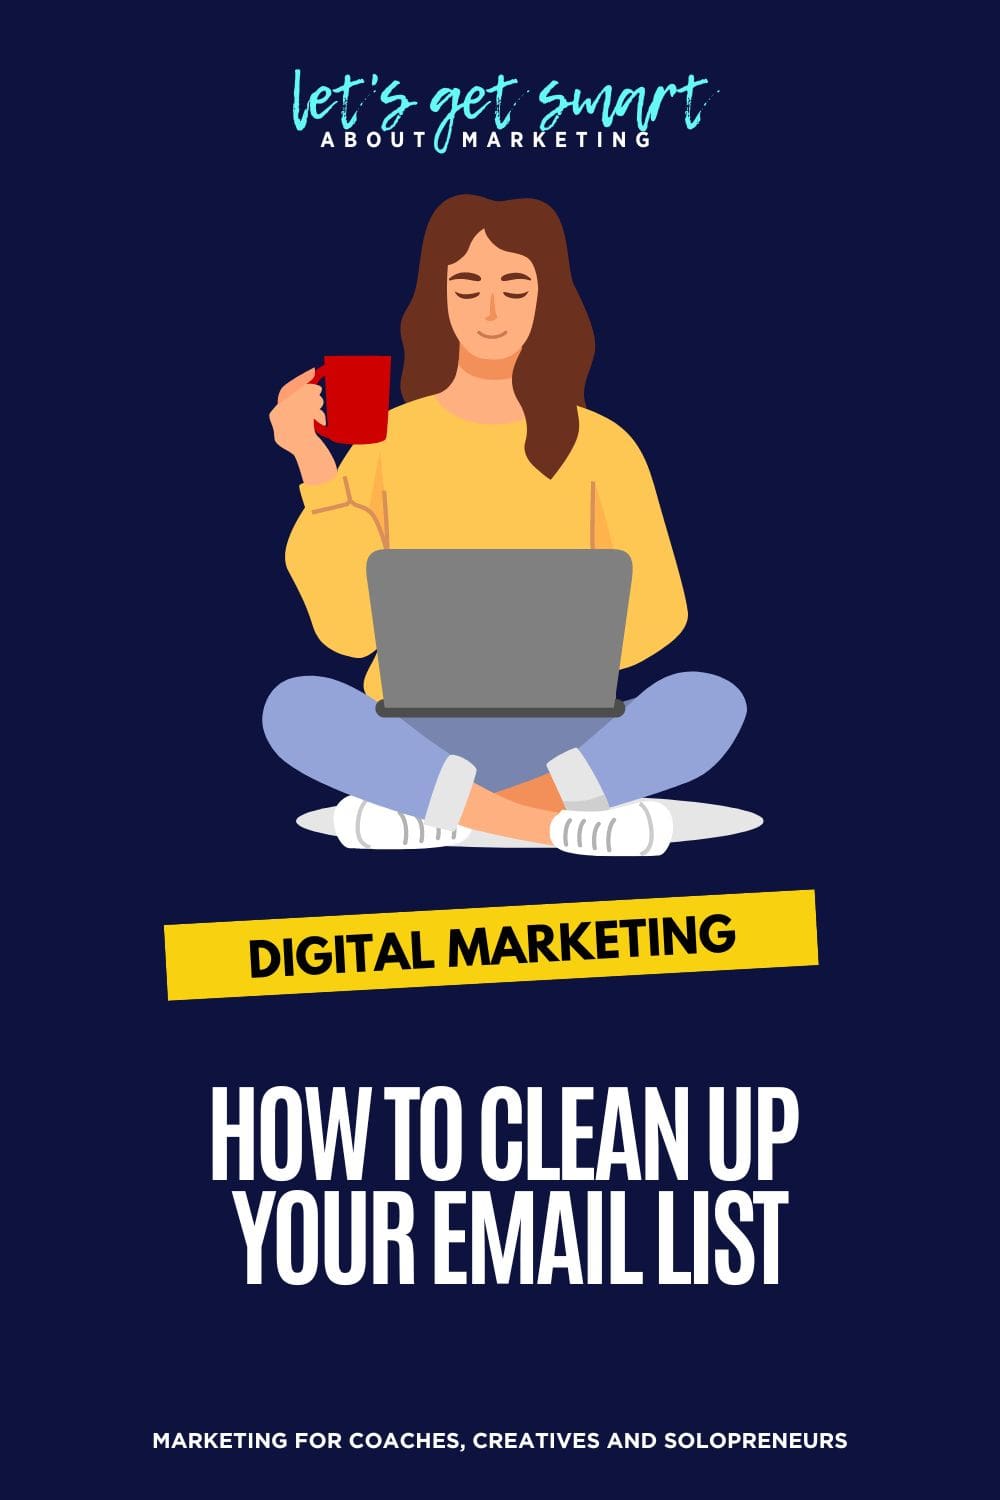 Easy Ways to Clean Up Your Email List